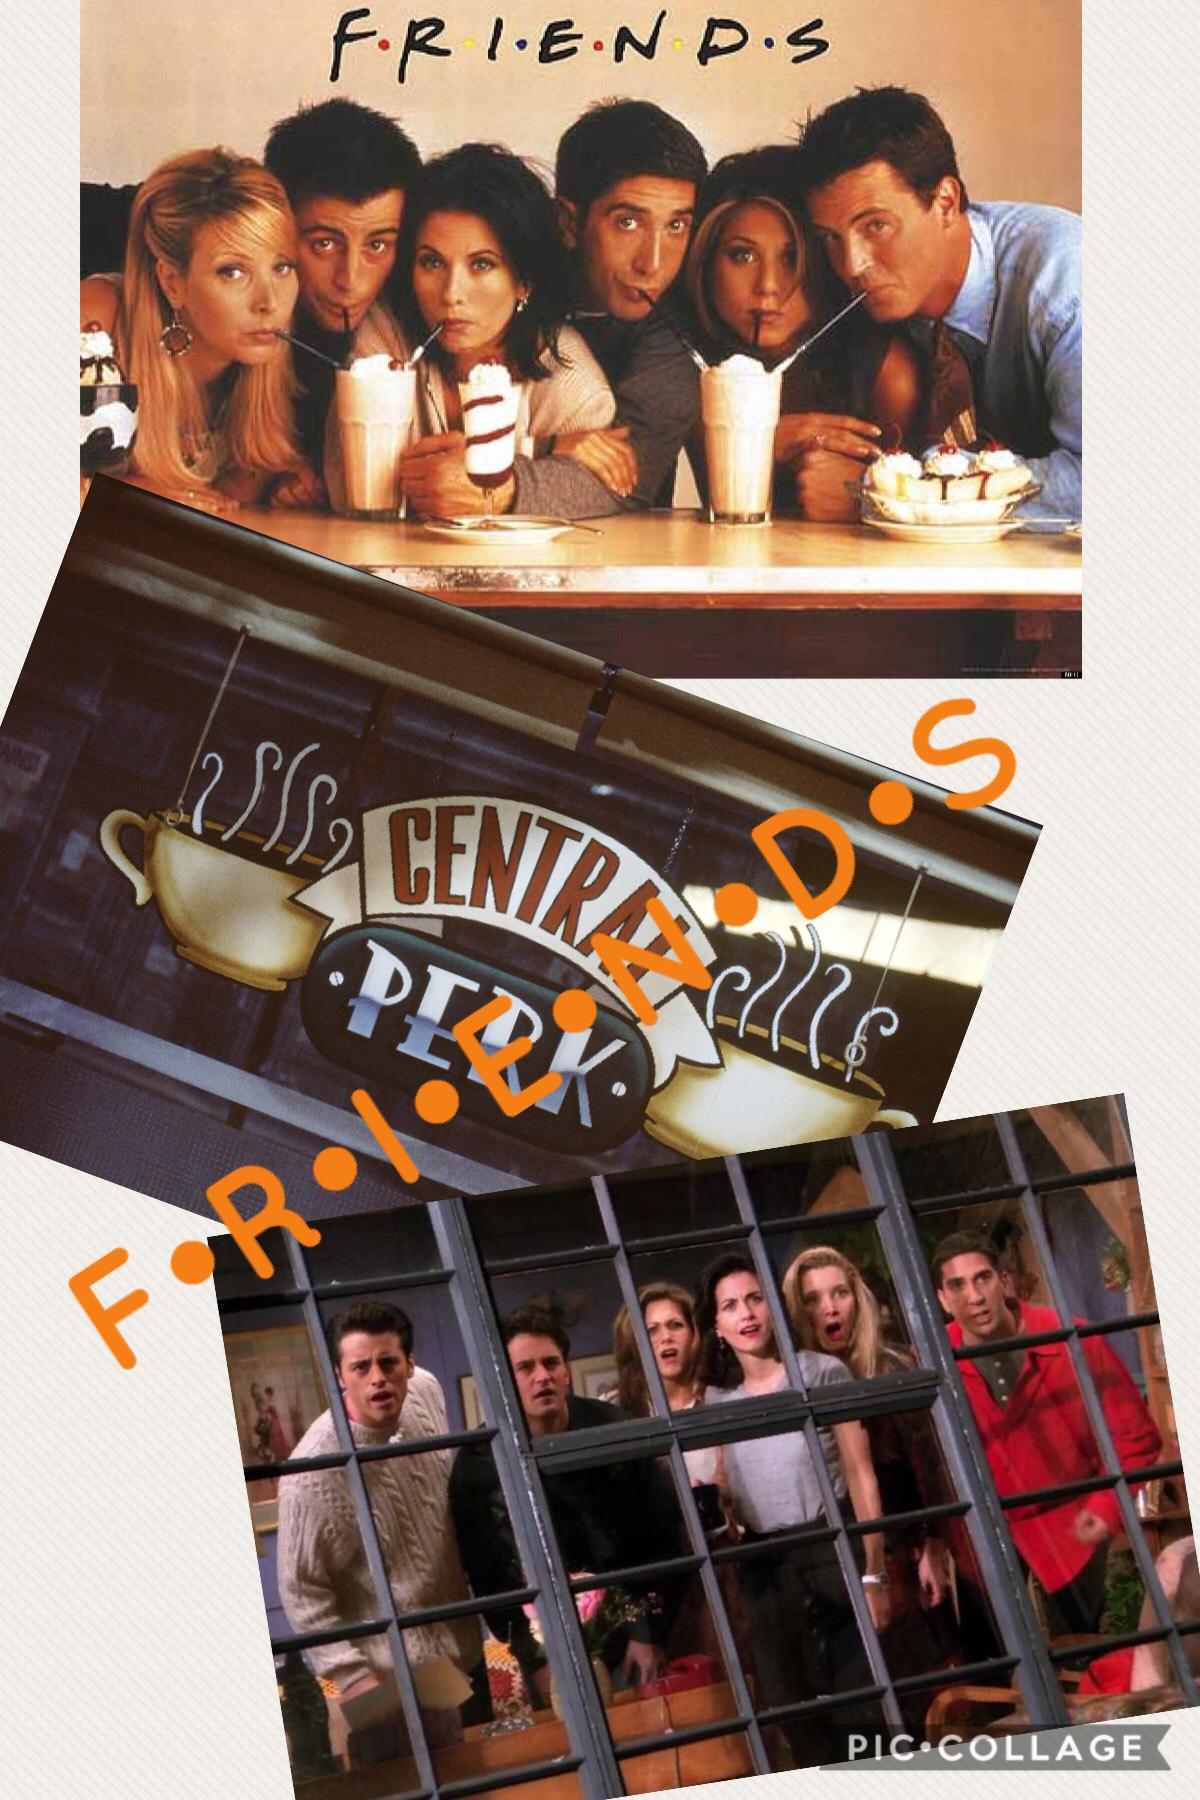 Best tv Program EVER #Friends! Comment if you like this Program?